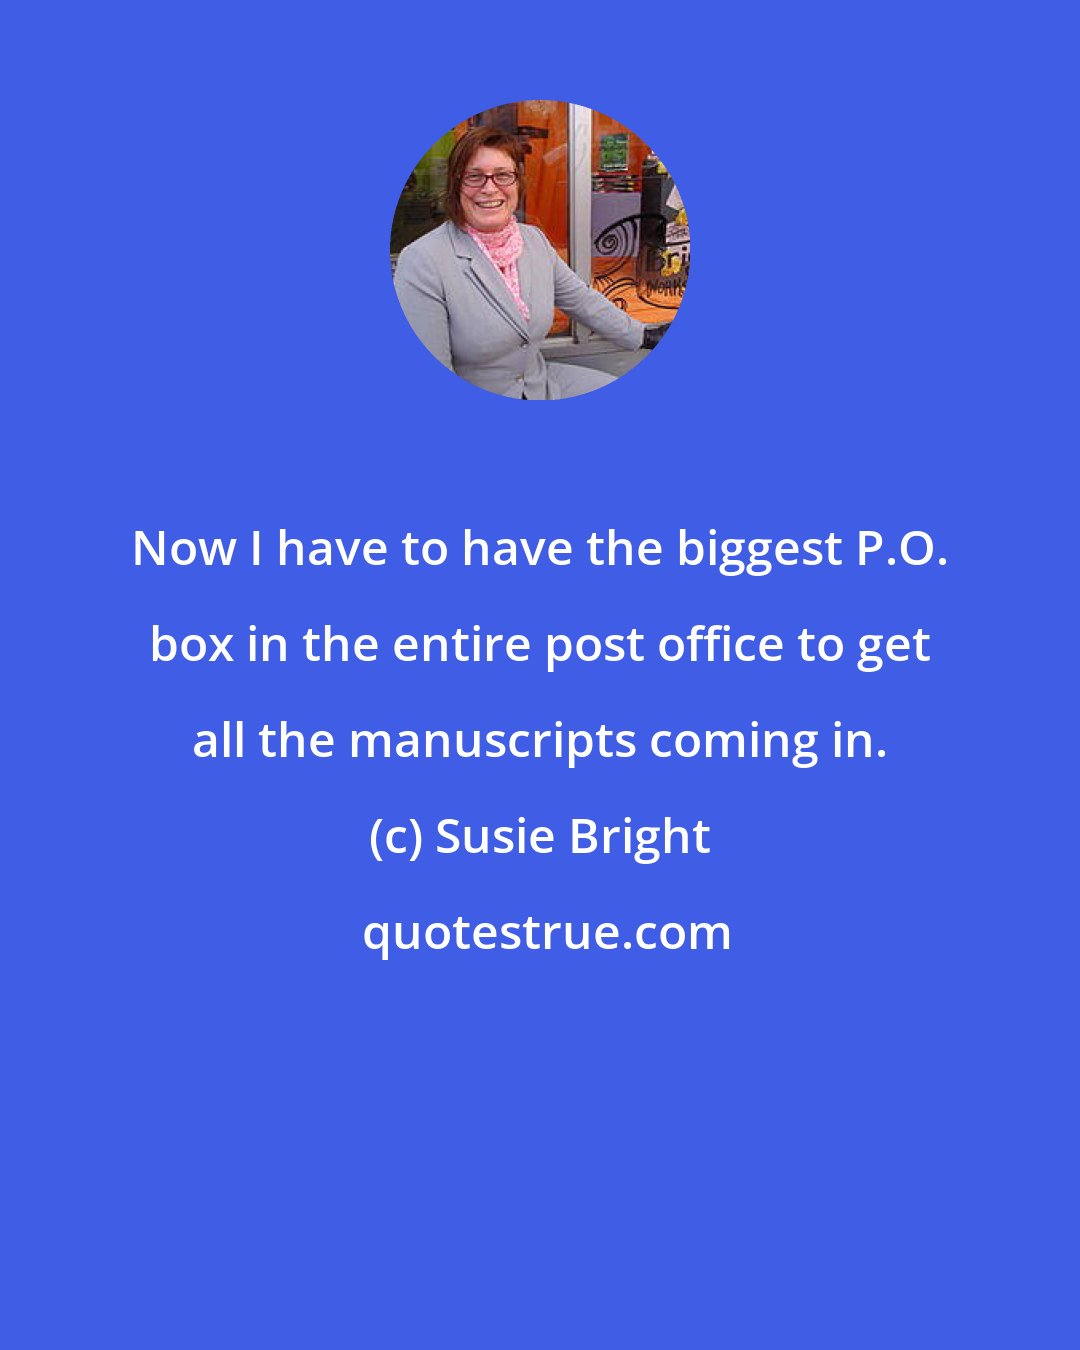 Susie Bright: Now I have to have the biggest P.O. box in the entire post office to get all the manuscripts coming in.